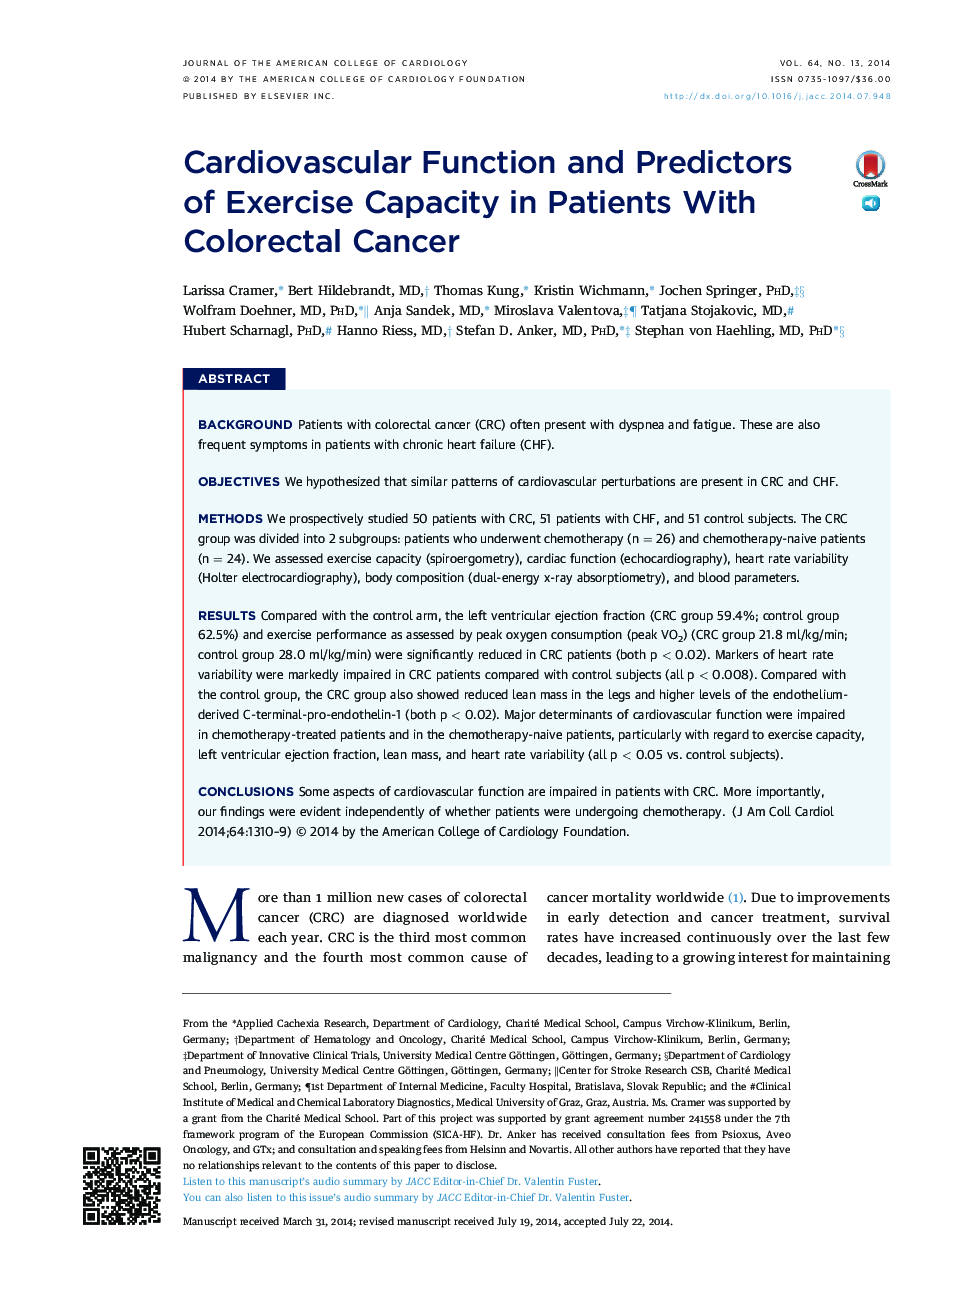 Cardiovascular Function and Predictors of Exercise Capacity in Patients With Colorectal Cancer 